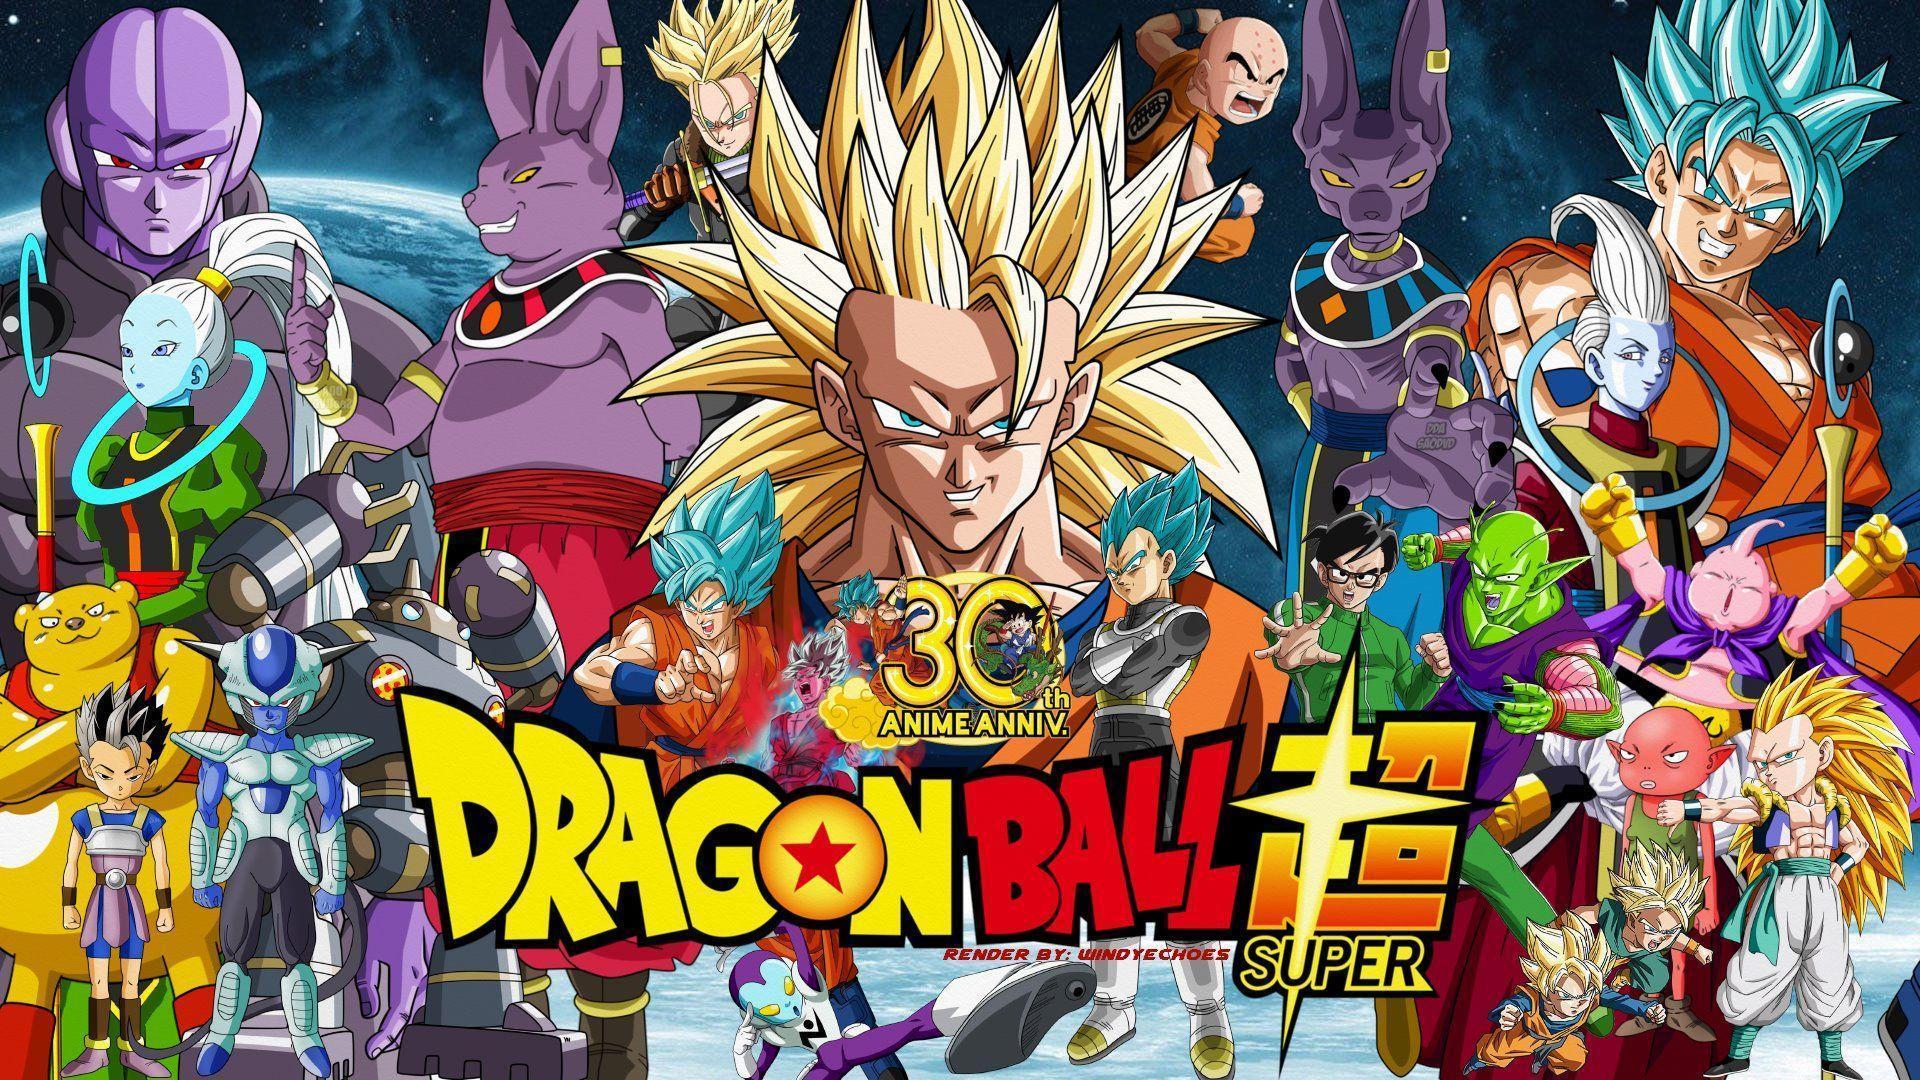 Dragon Ball Z Super Wallpapers posted by Michelle Cunningham